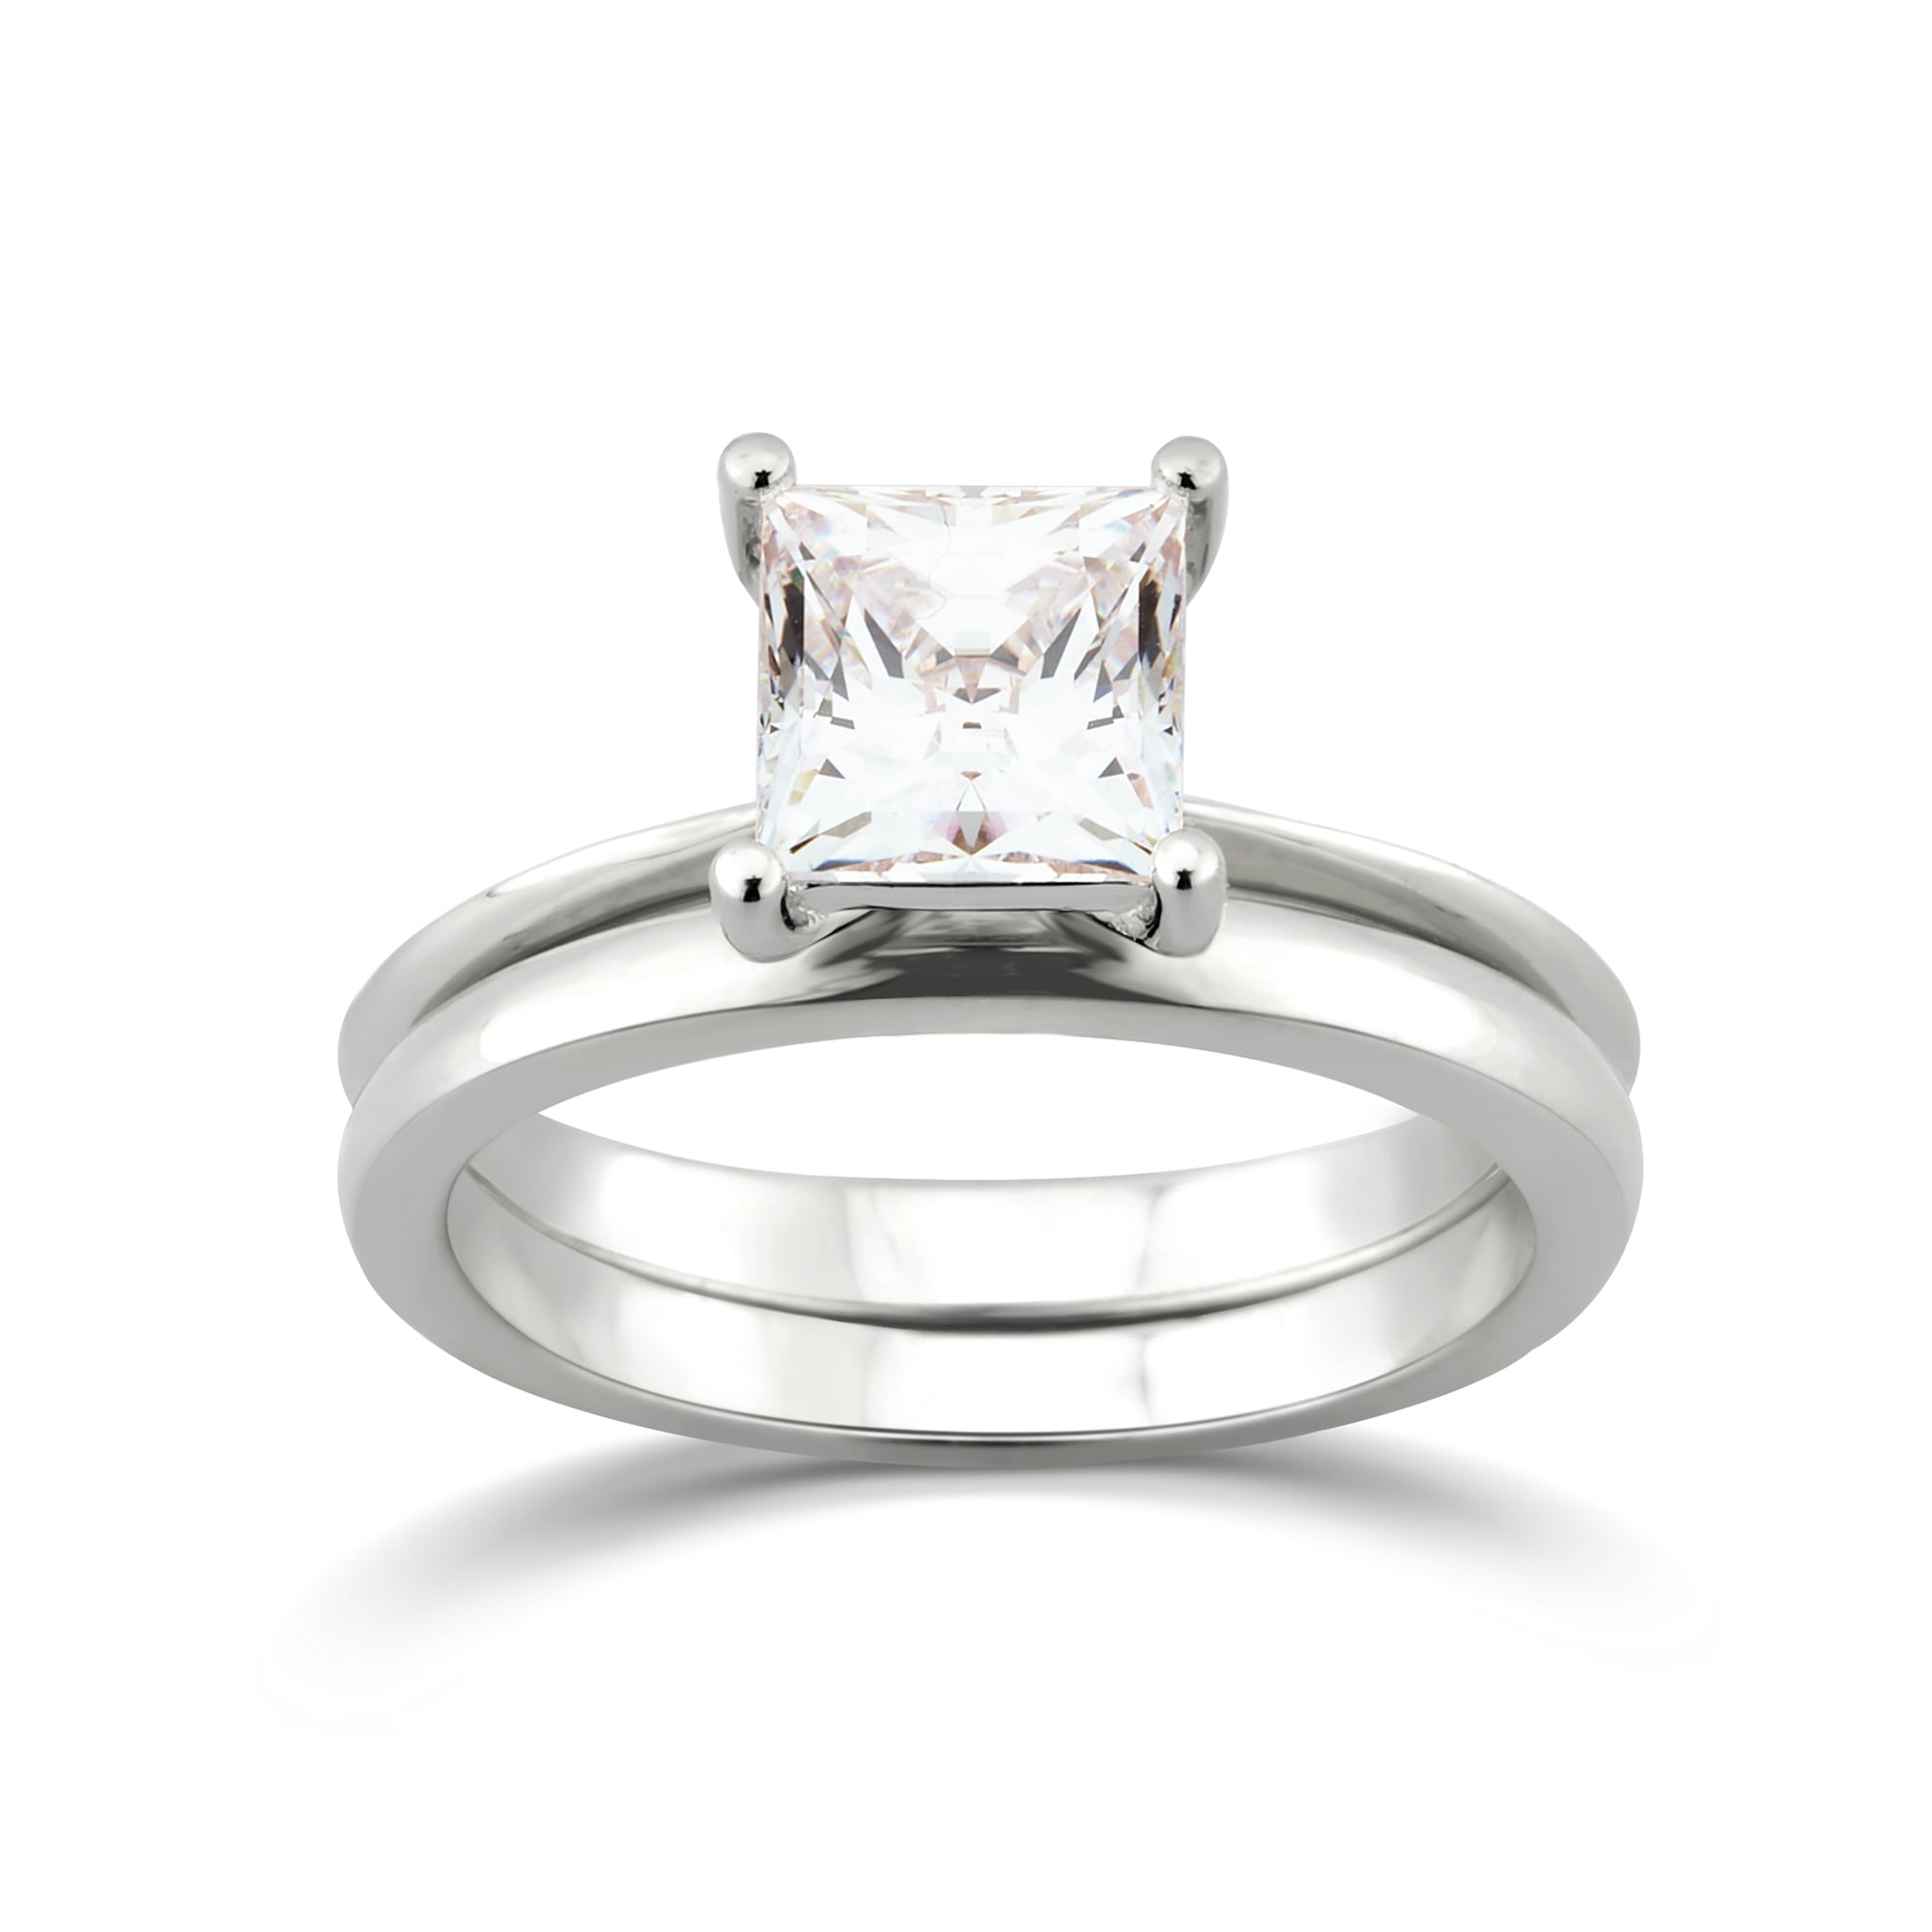 1.50CT Solitaire Cz 2 Rings Set .925 Sterling Silver Ring Sizes 5-10 